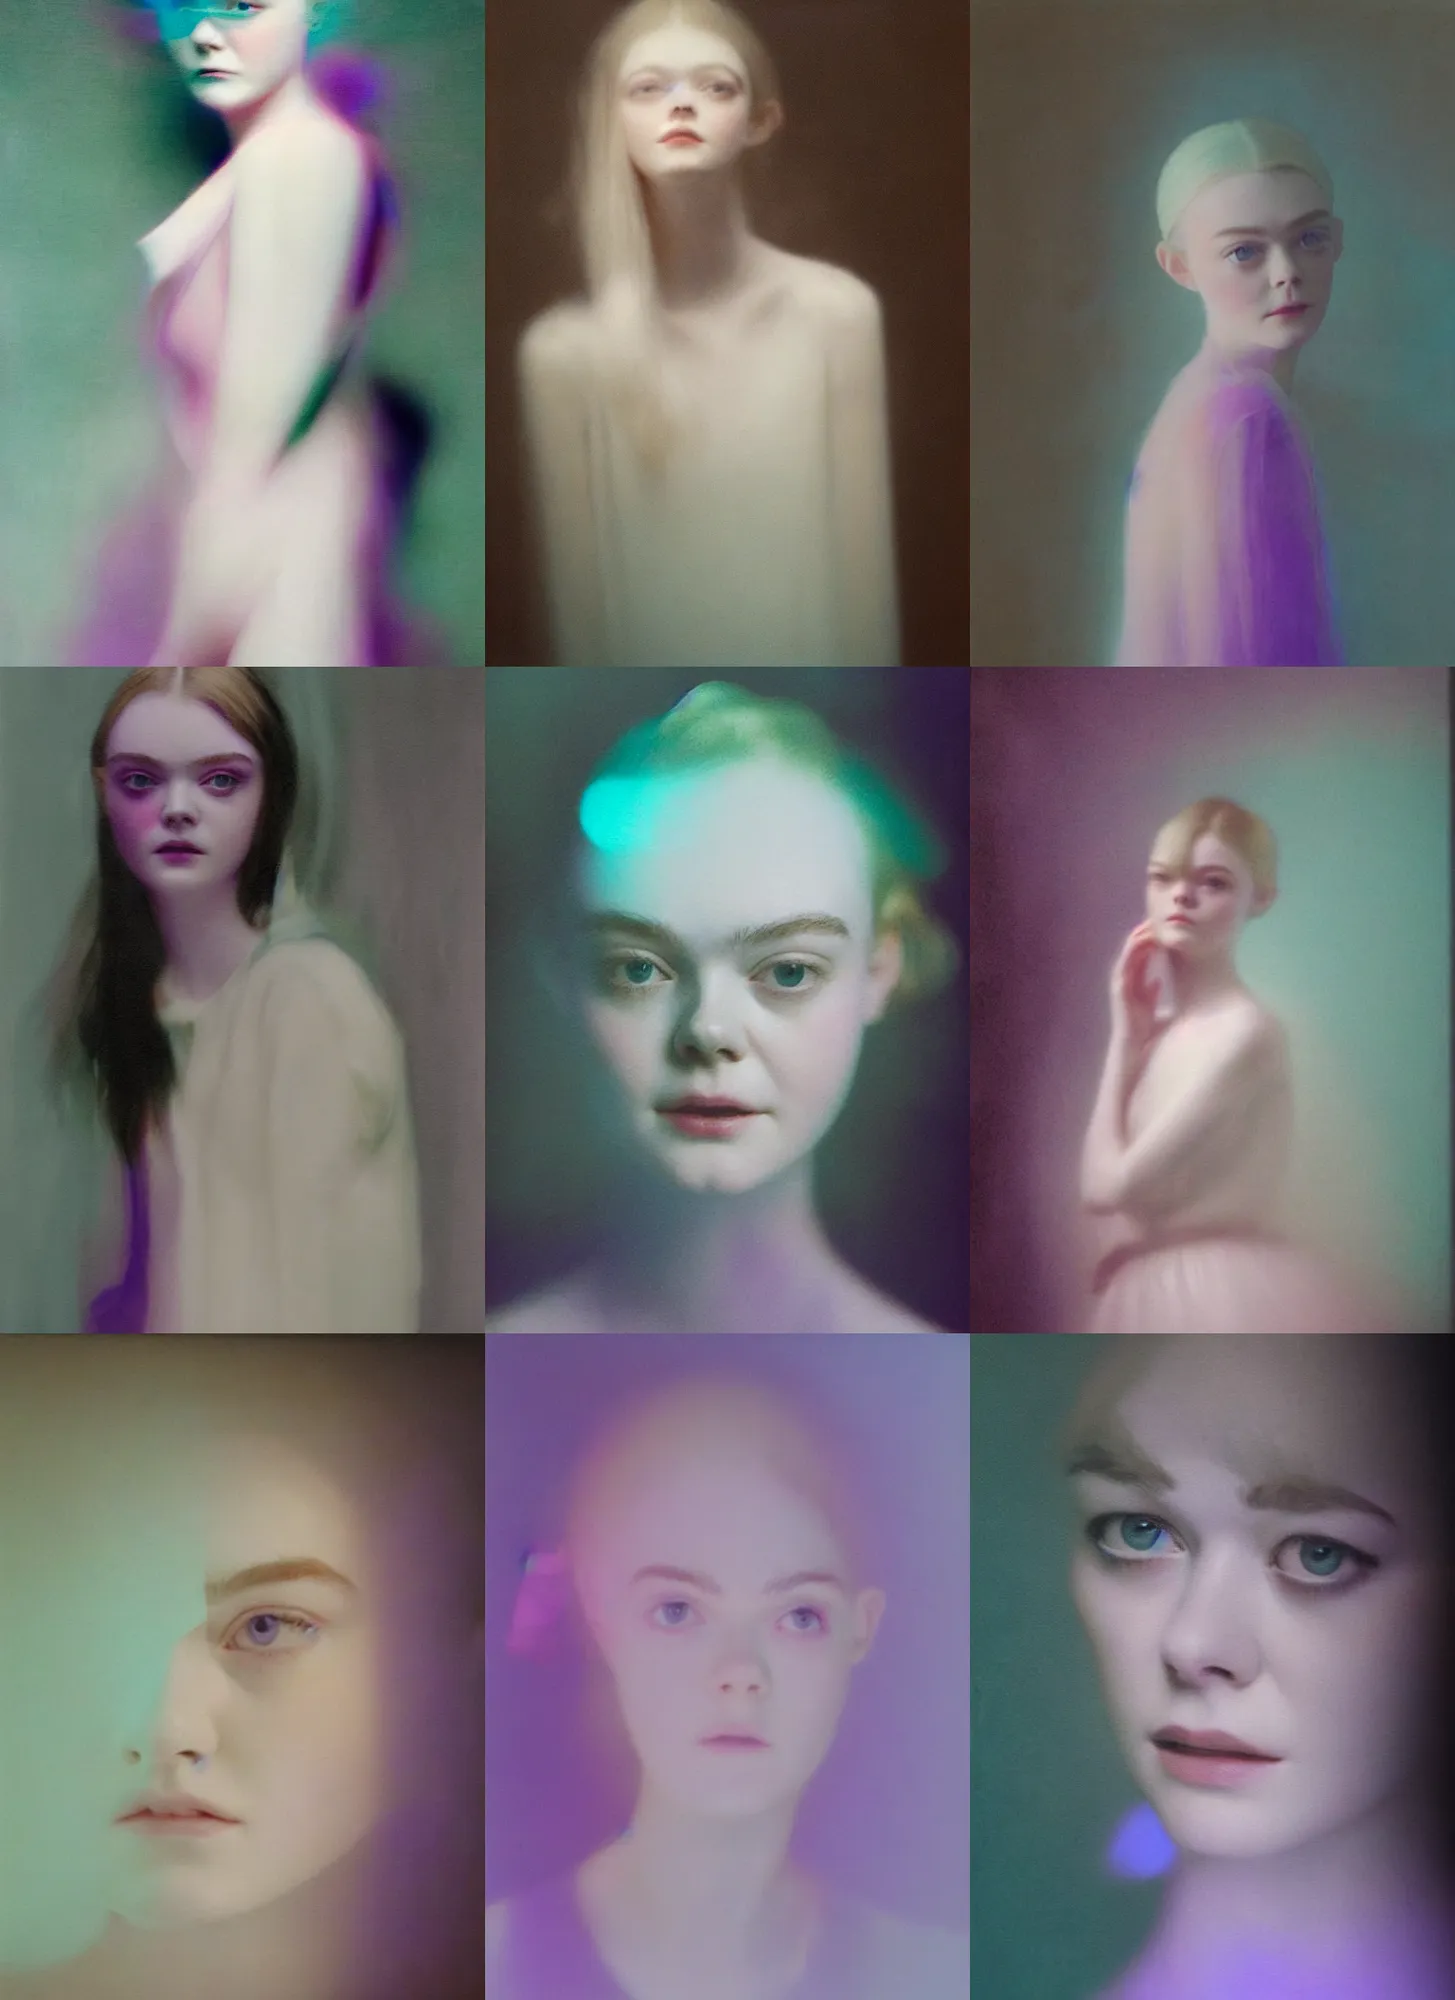 Prompt: out of focus photorealistic portrait of elle fanning by sarah moon, very blurry, translucent white skin, closed eyes, foggy, violet and aqua neon lights